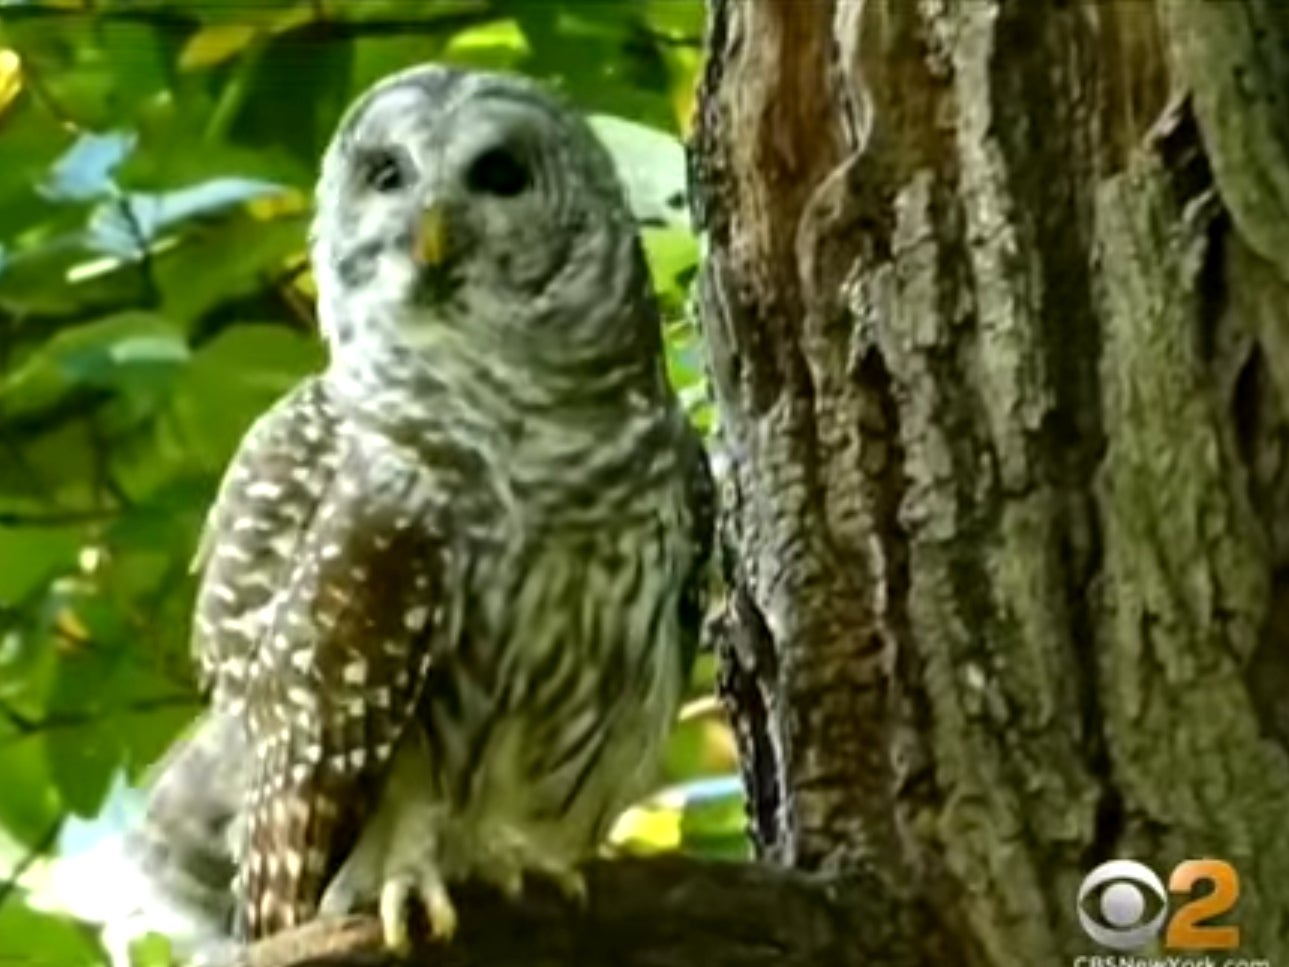 Barry, a Barred owl that was beloved by New Yorkers